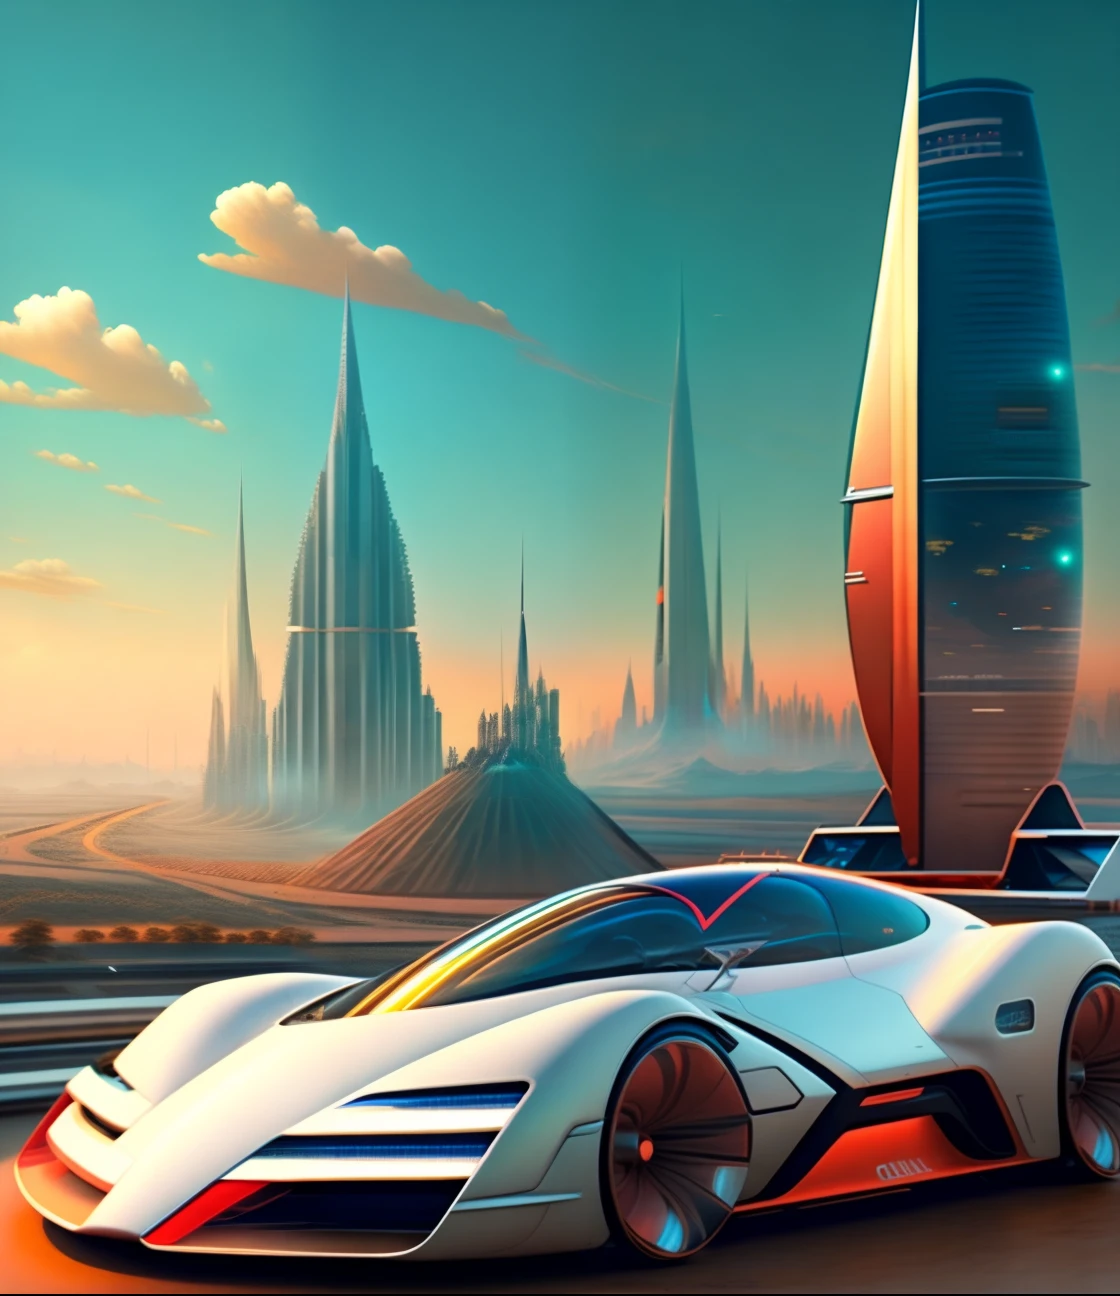 "The car, lush urban landscape,, midjourney, vibrant vector art, Futuristic car front,The car is located at the top of the screen"